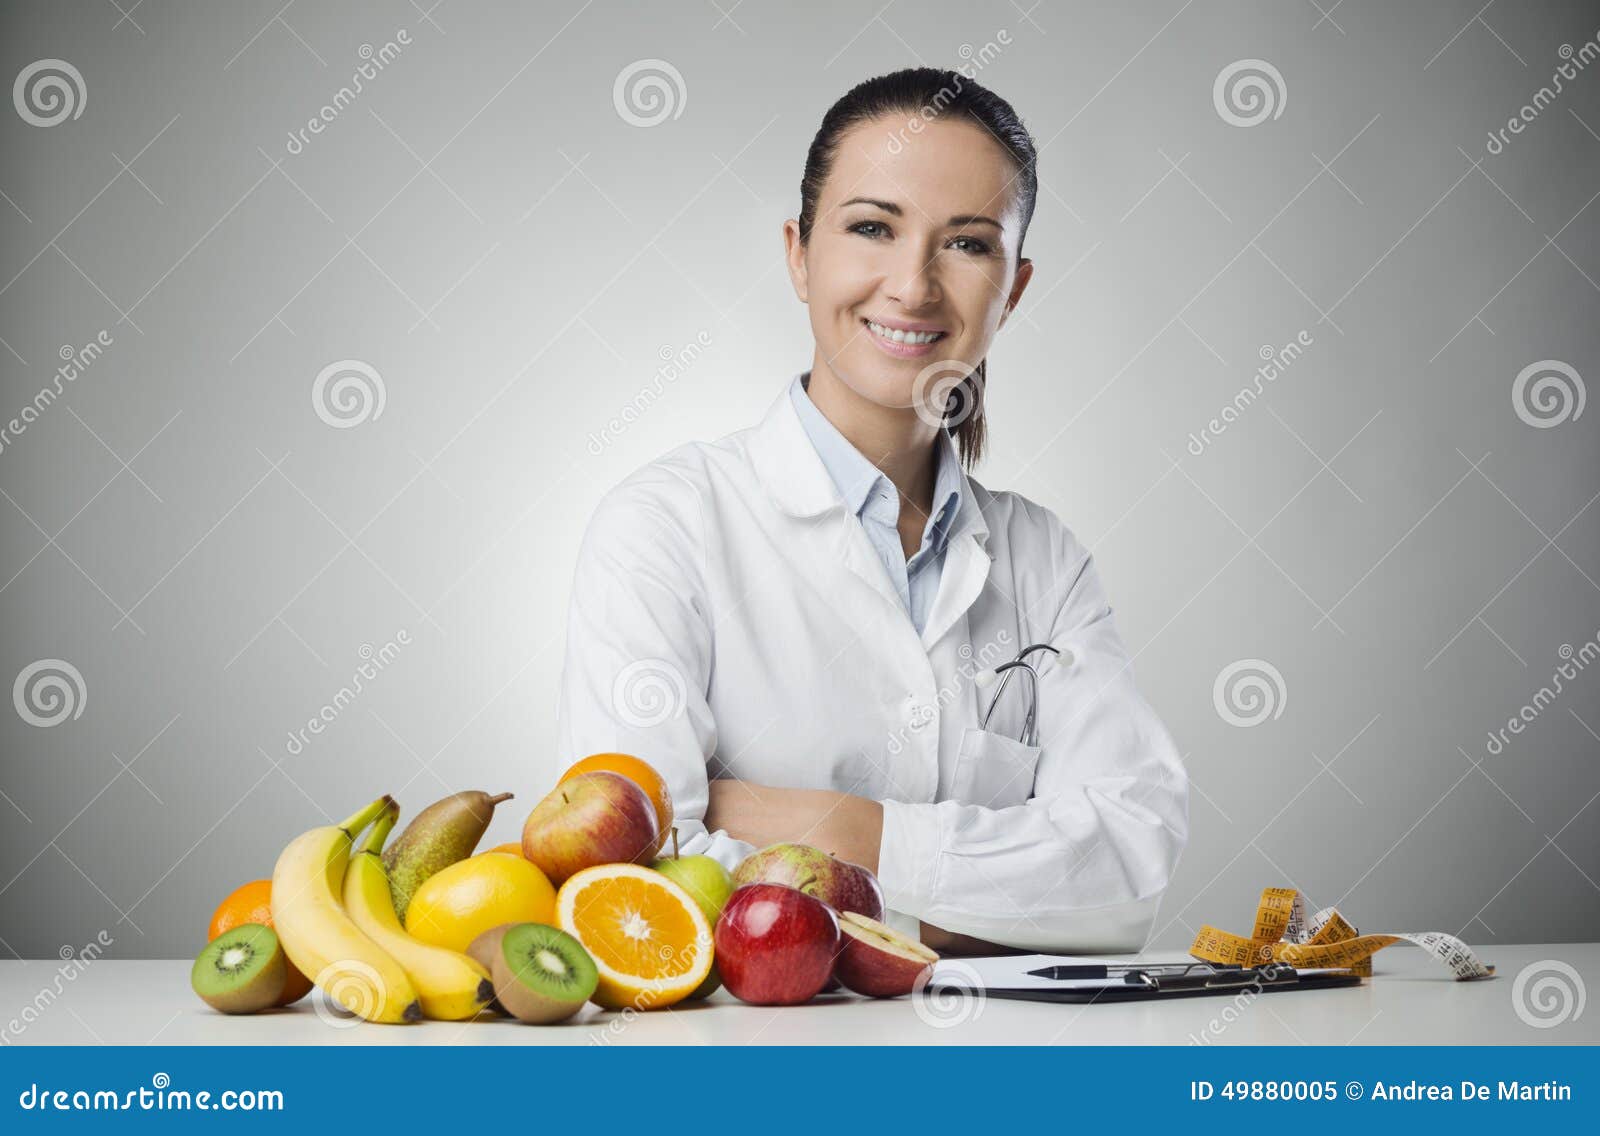 smiling nutritionist at work